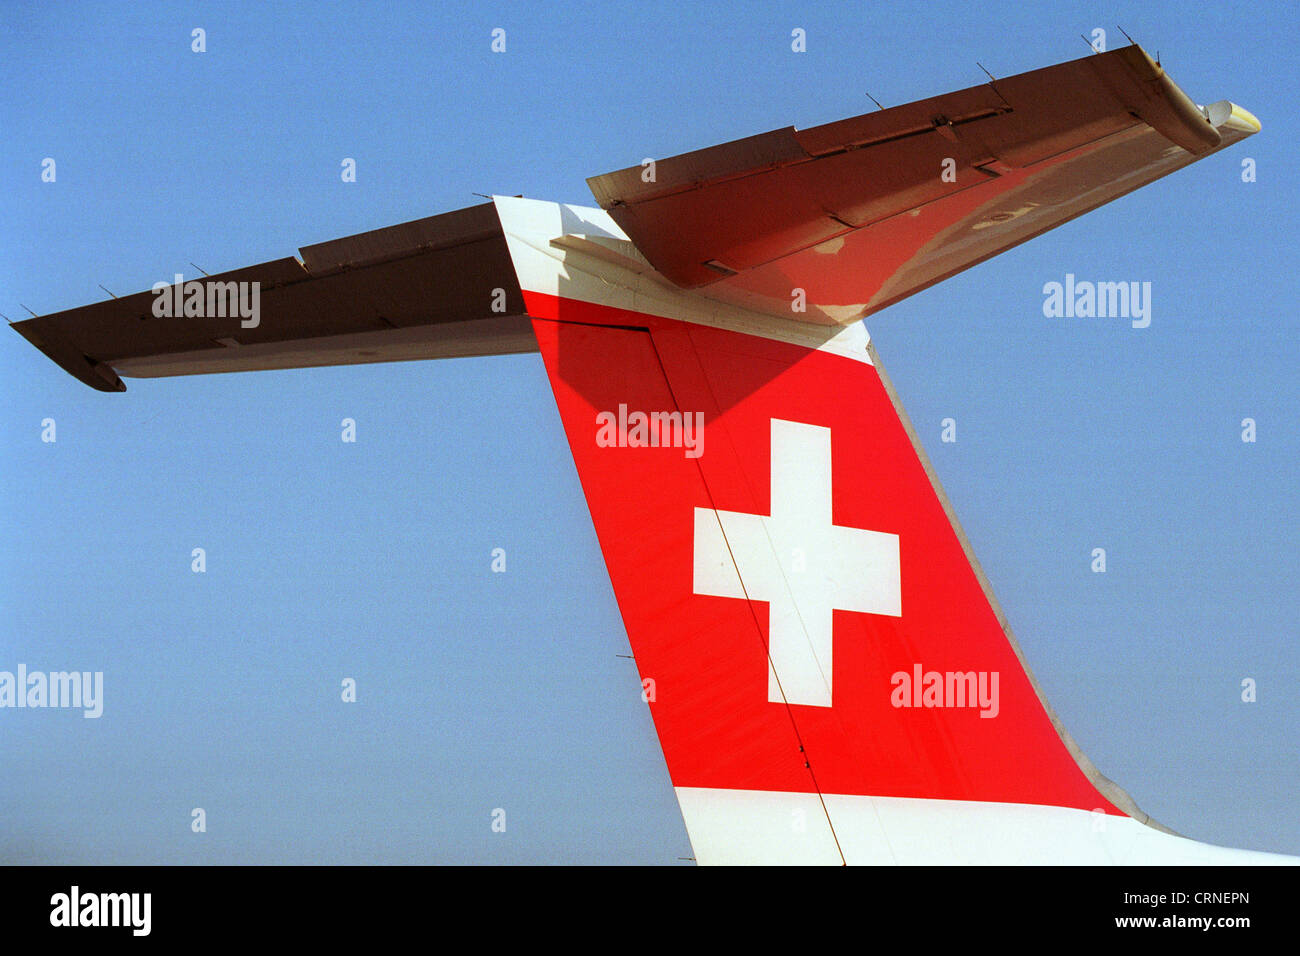 Swiss Airline logo on the rear of a machine Stock Photo